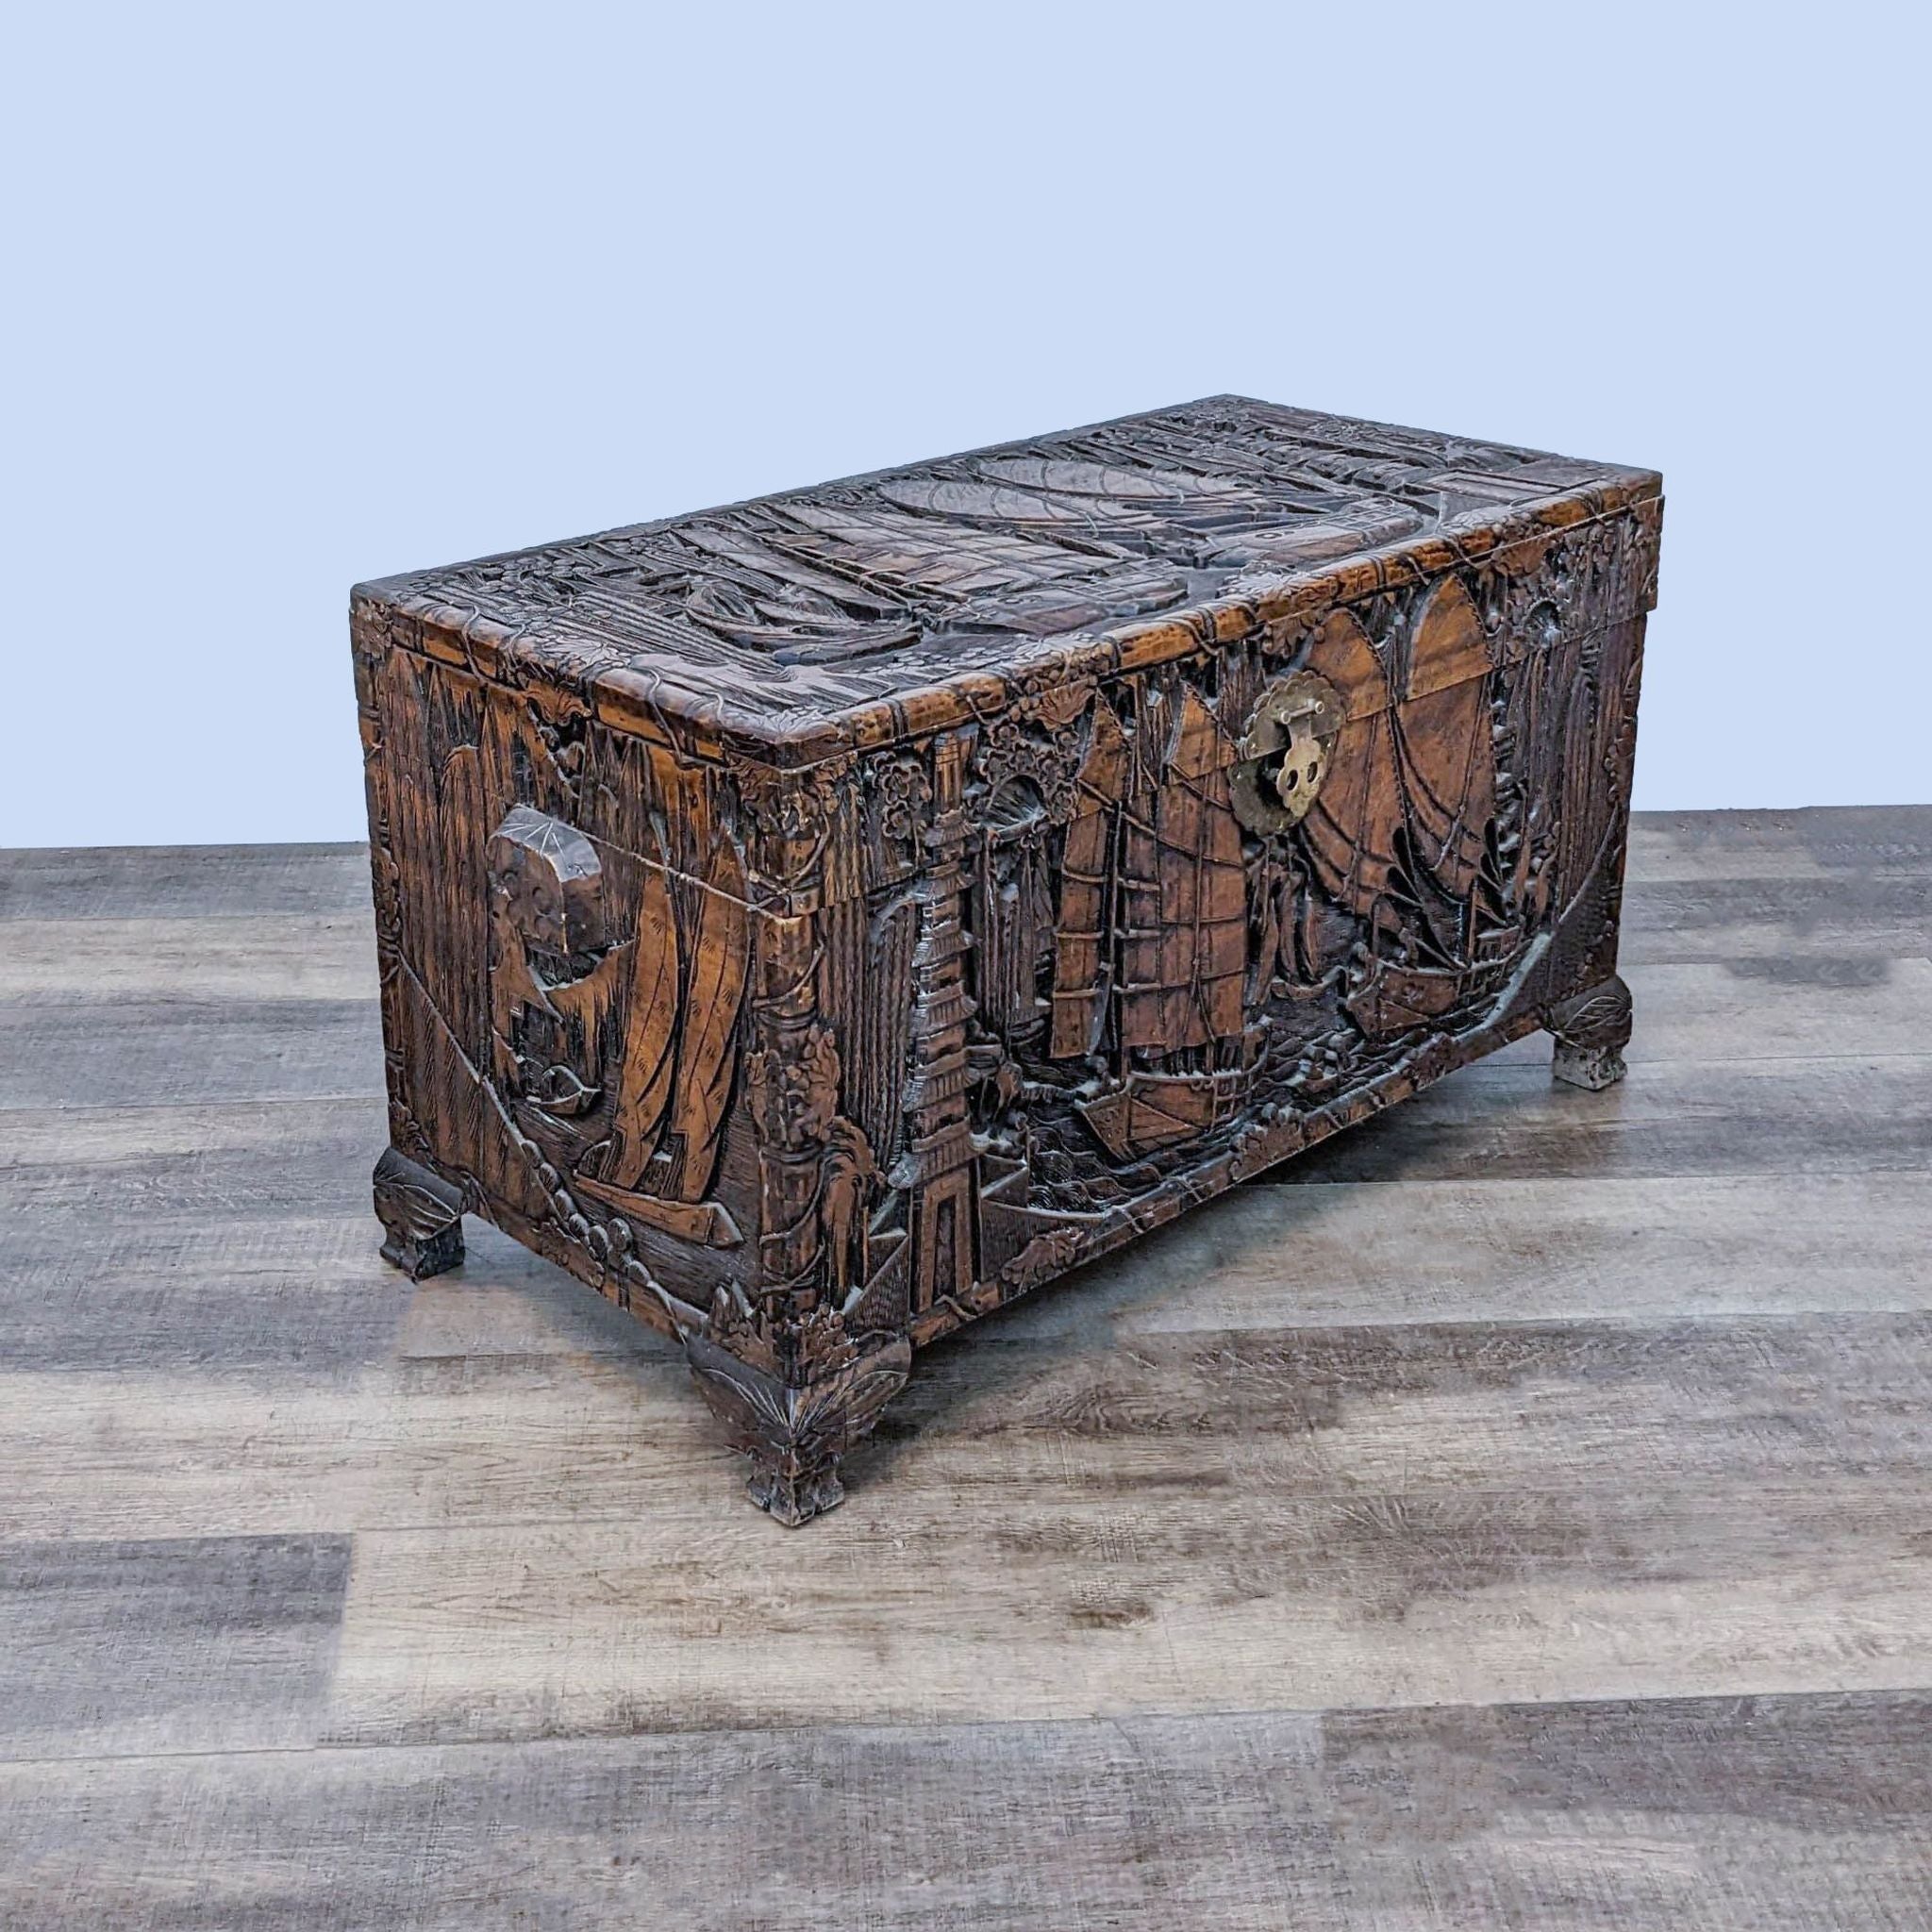 Historic Reperch trunk with elaborate oriental engraving, brass hardware, brought from WWII China.